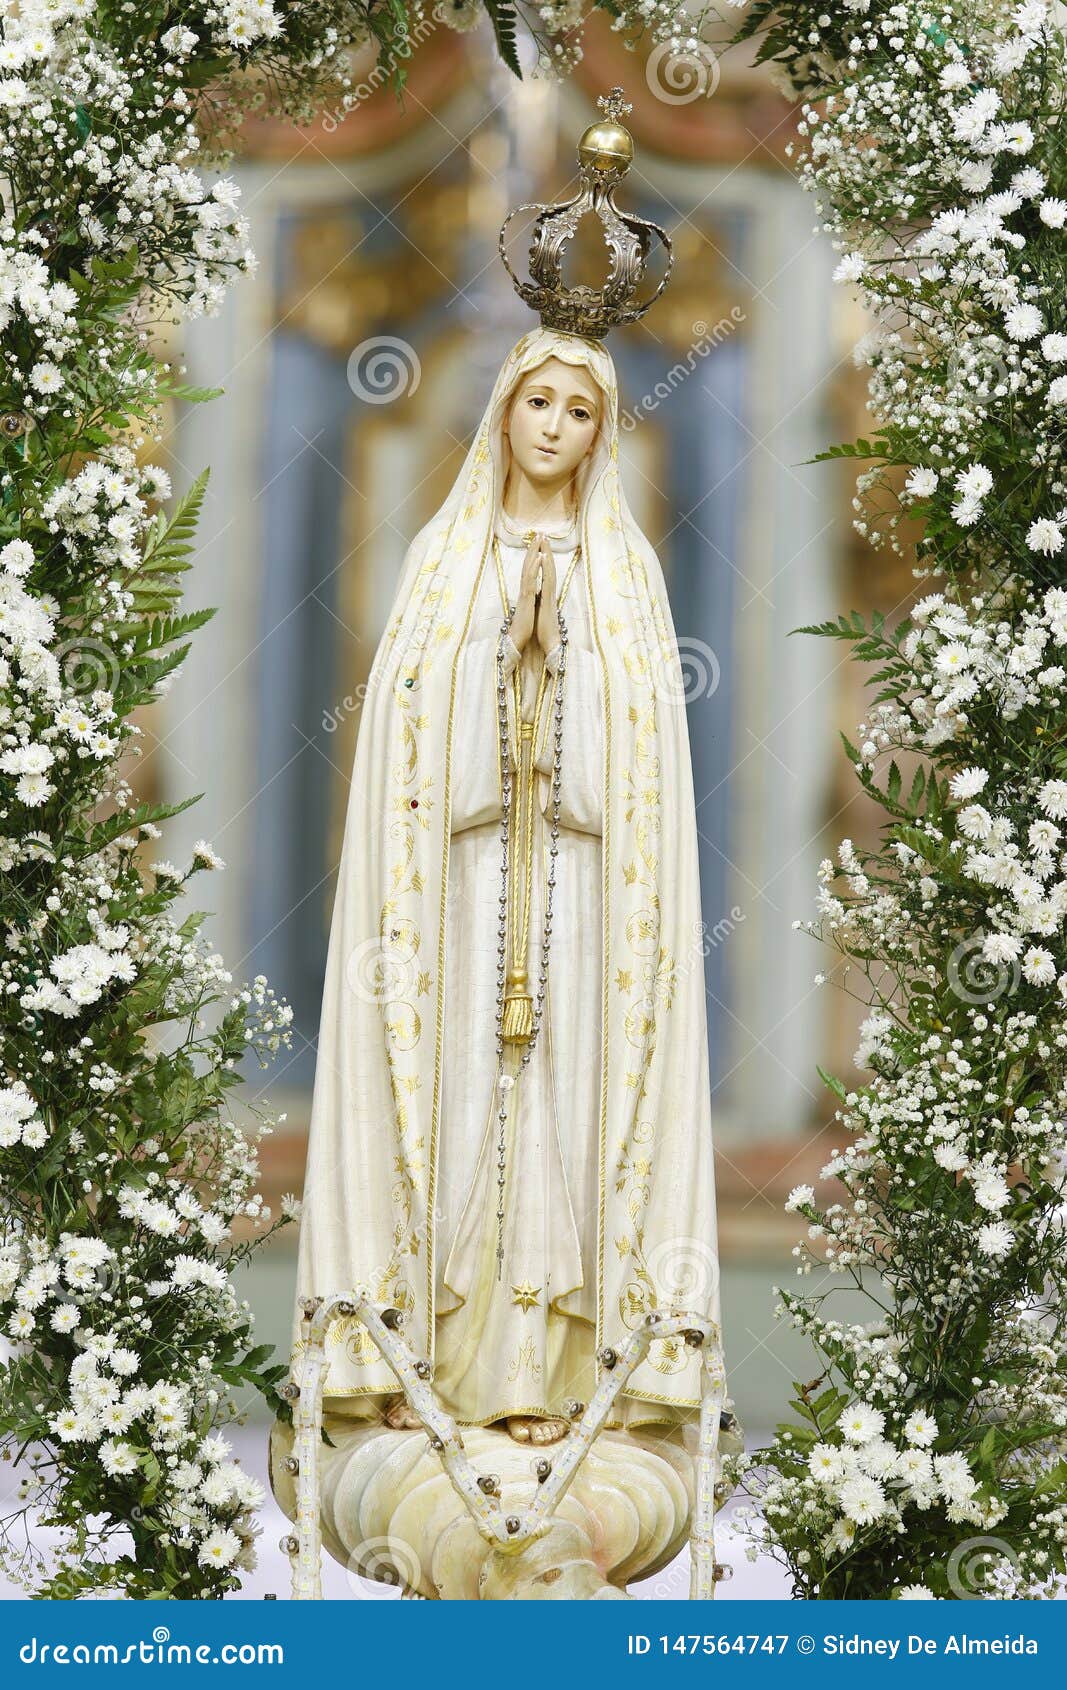 Statue of the Image of Our Lady of Fatima Stock Image - Image of ...